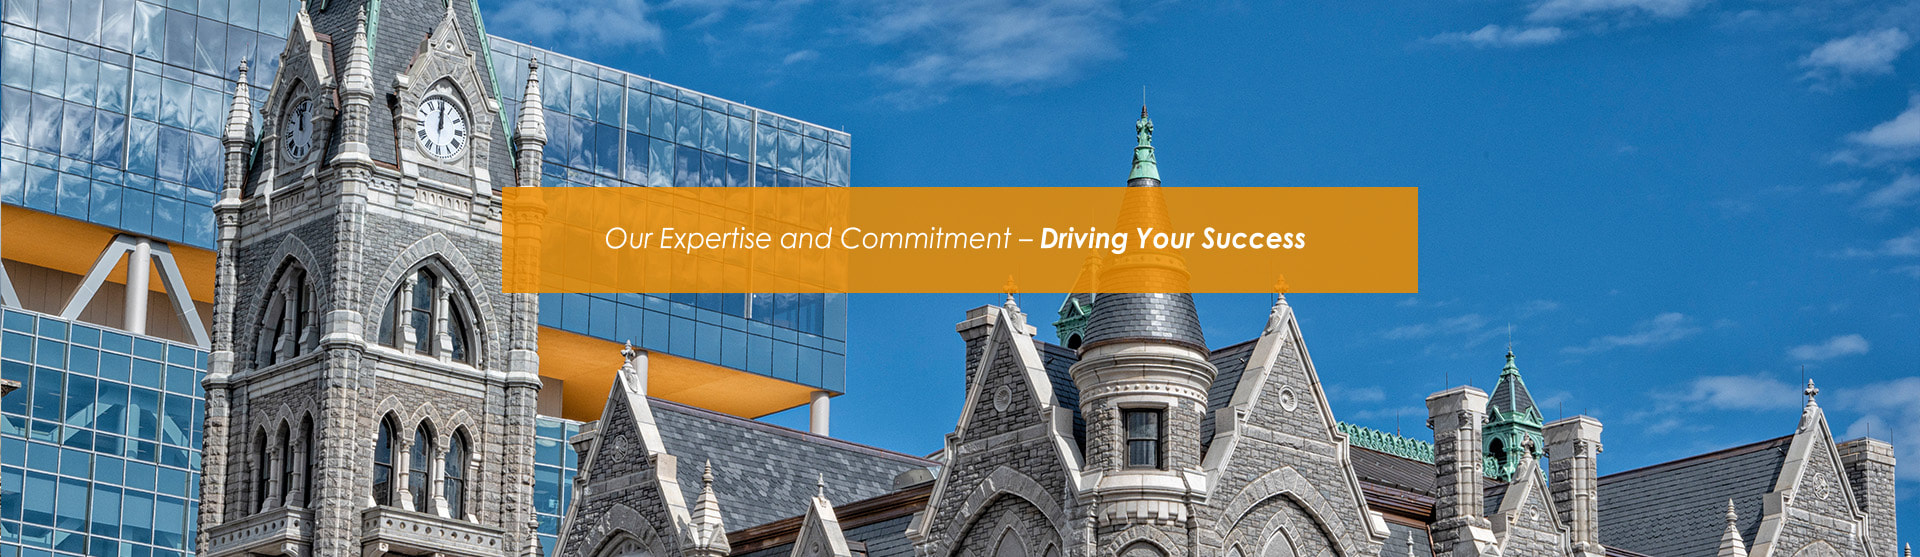 Our Expertise and Commitment – Driving Your Success